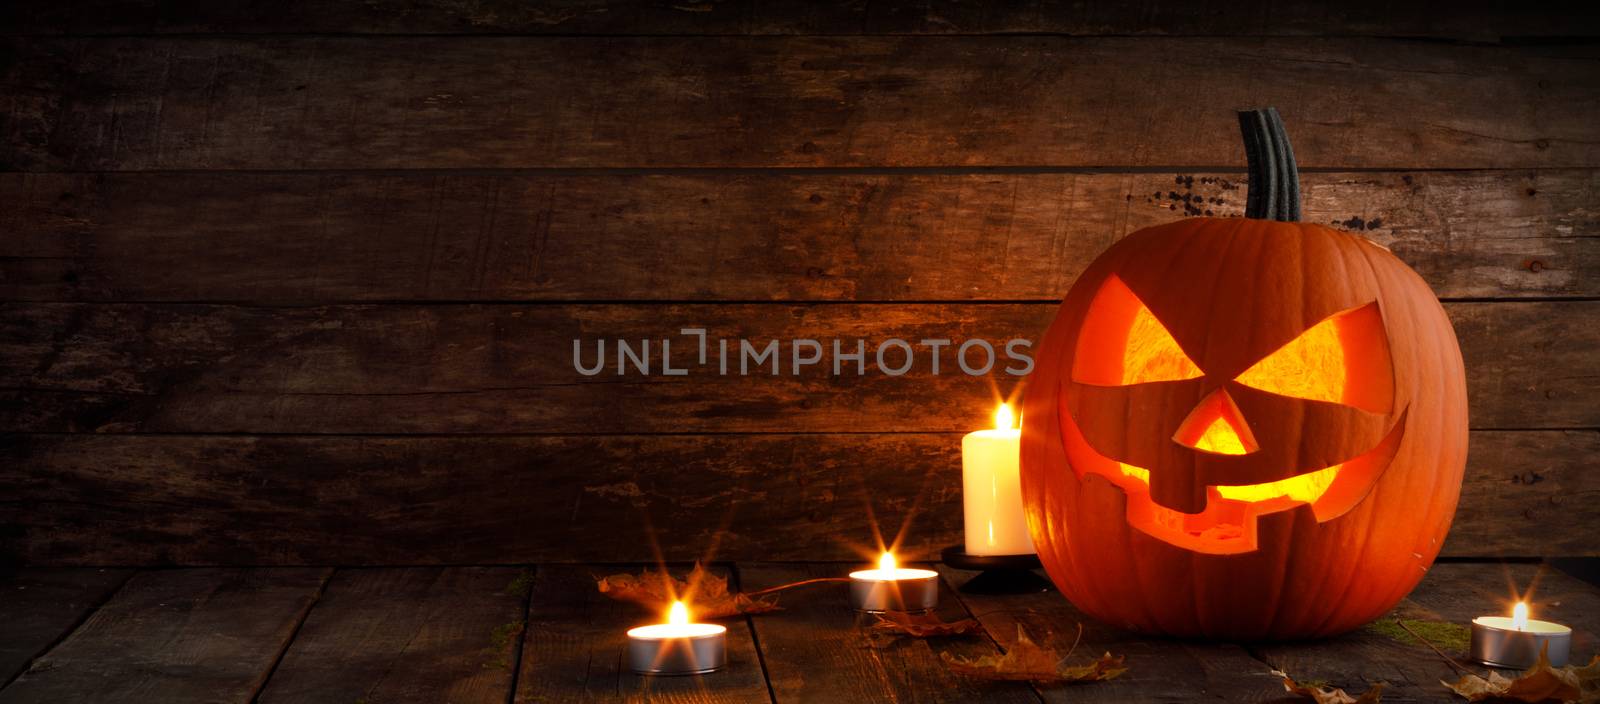 Halloween pumpkin head jack o lantern and candles on wooden background